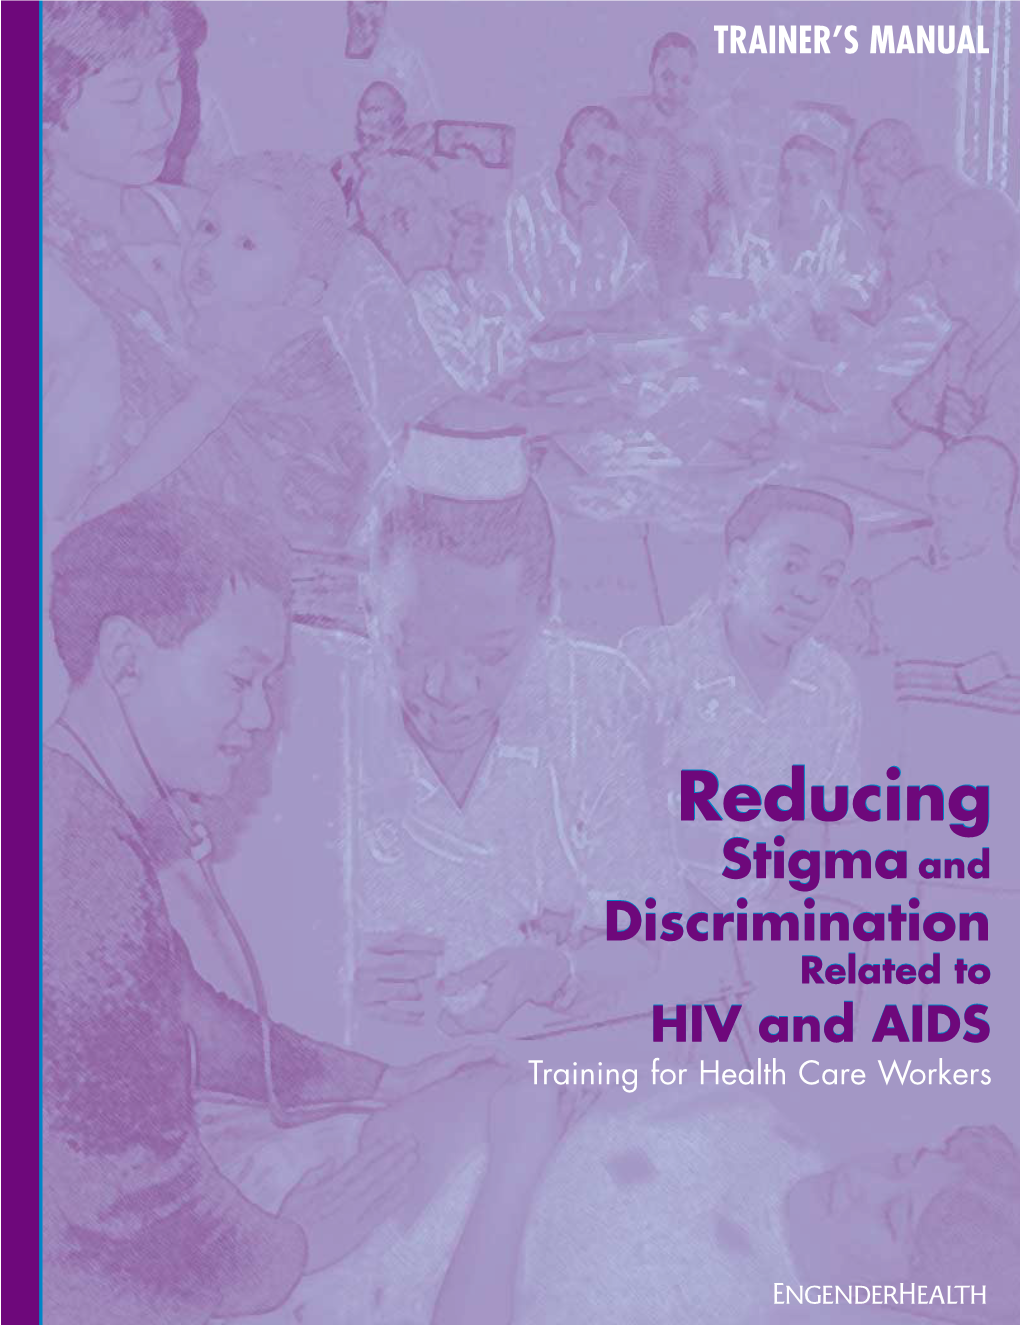 Reducing Stigma and Discrimination Related to HIV and AIDS Training for Health Care Workers